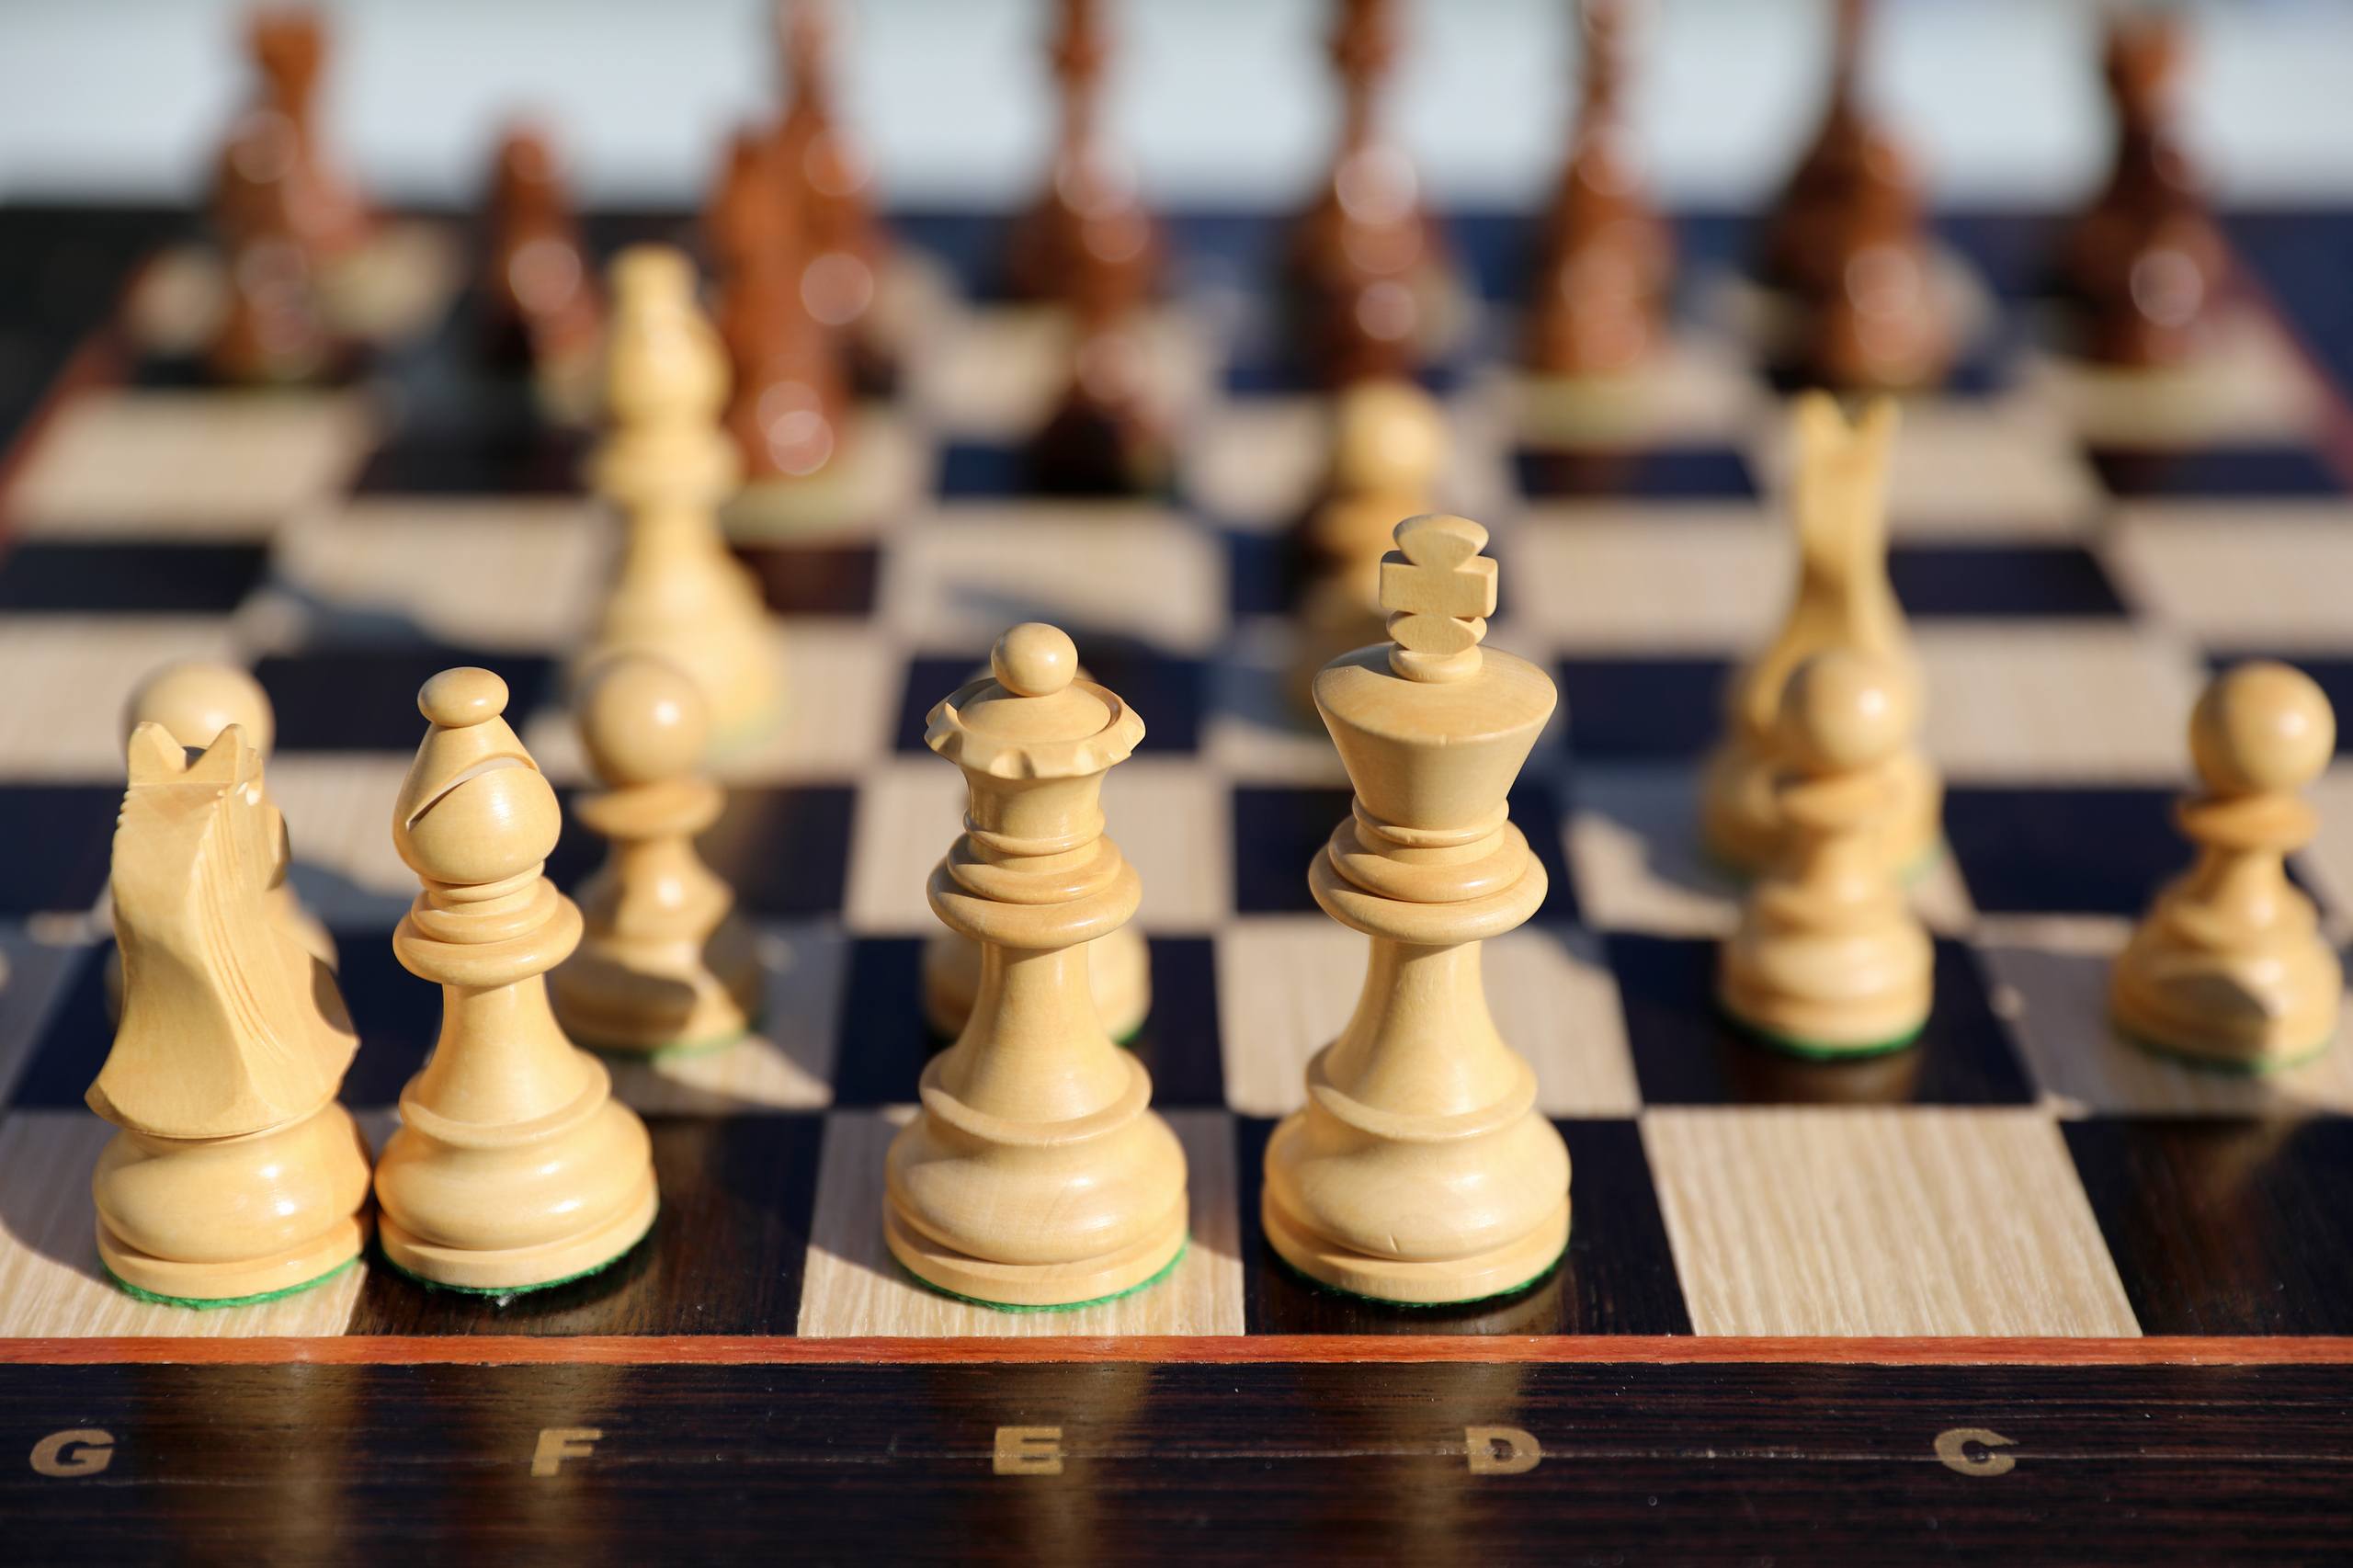 Chess board represents possibility of automation to transform tasks